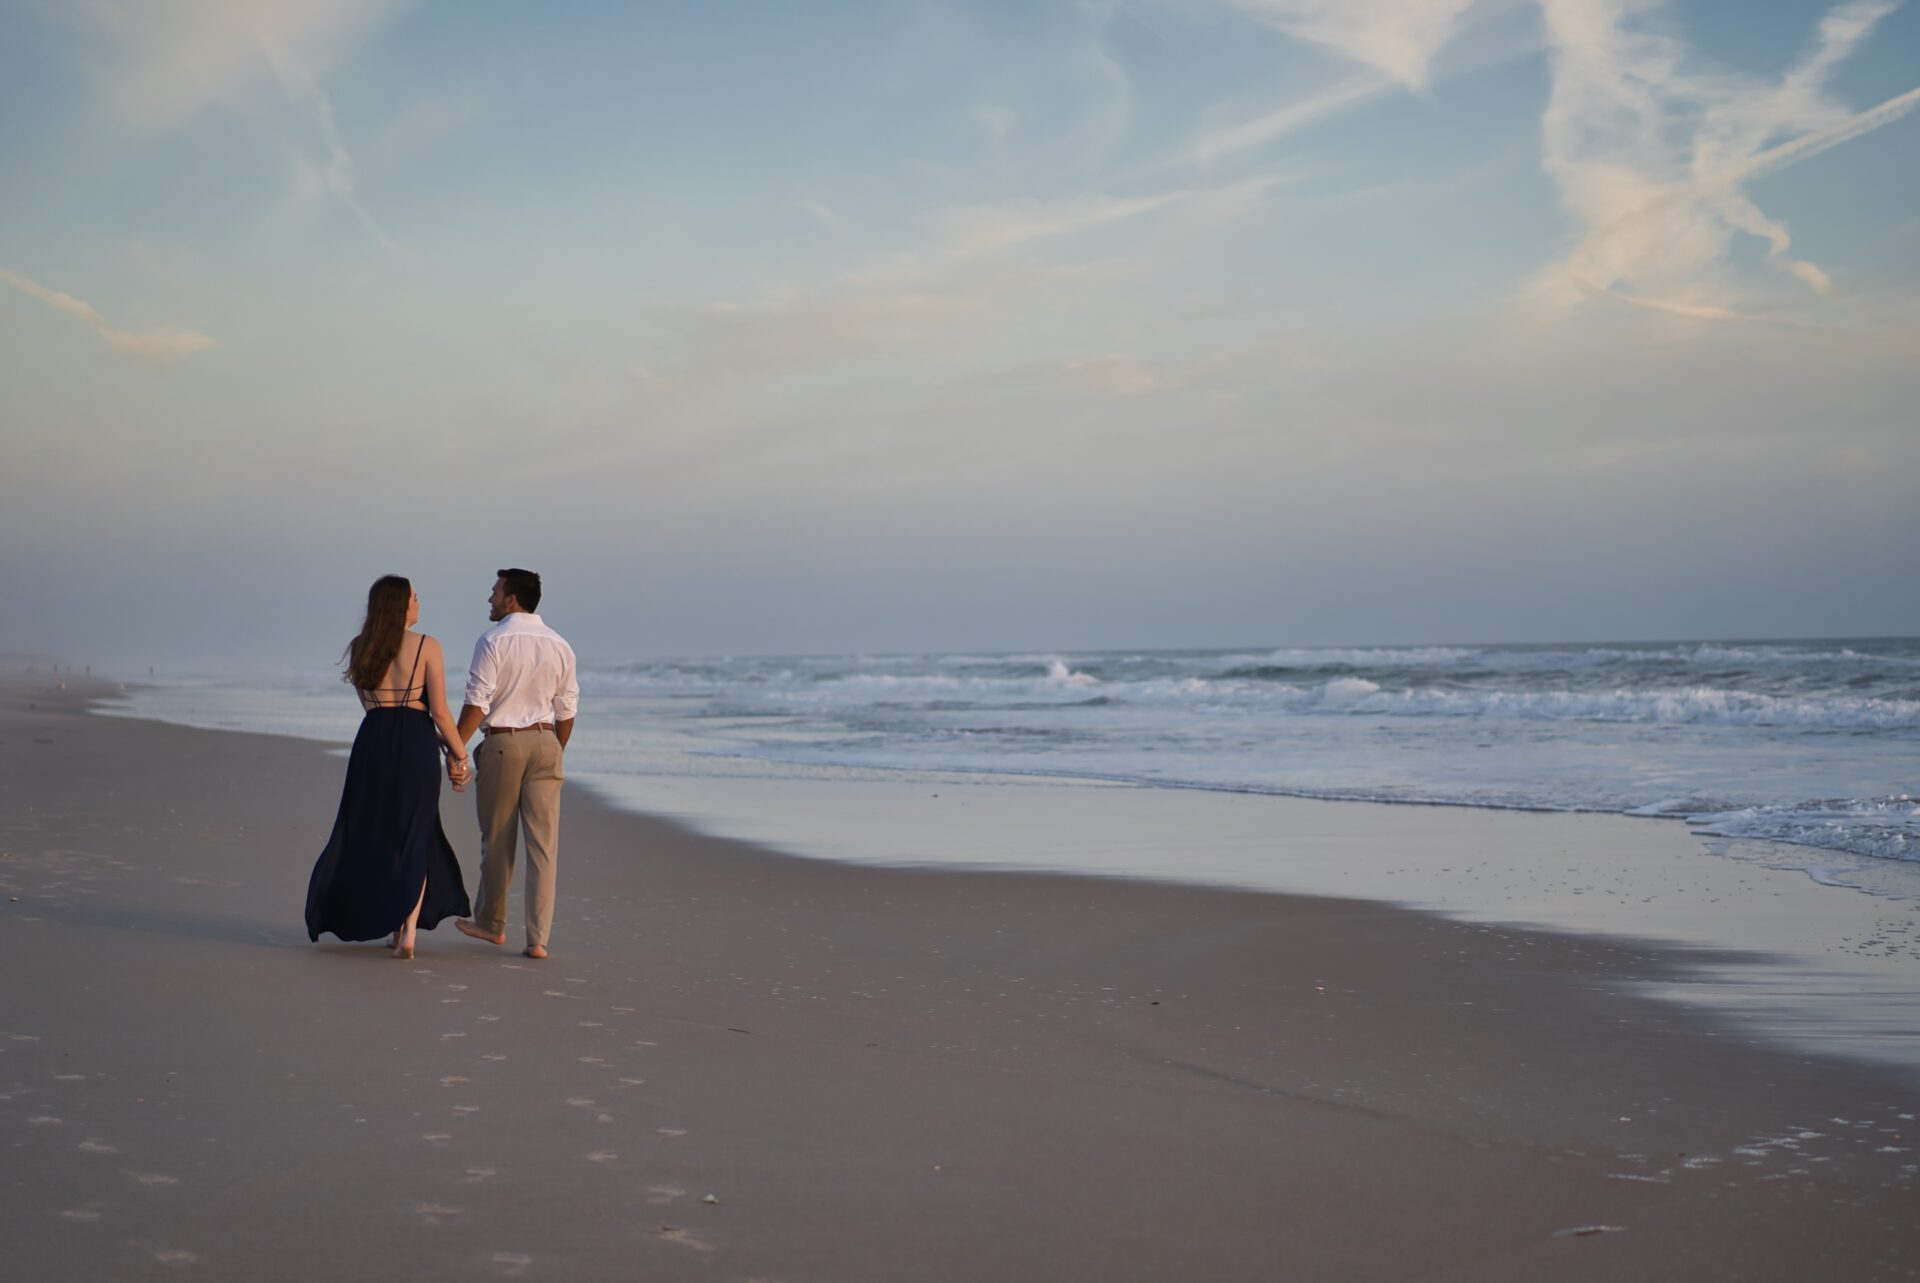 Couple Walking on the beach at sunrise in Cocoa Beach Florida, taken by Van Hook Media